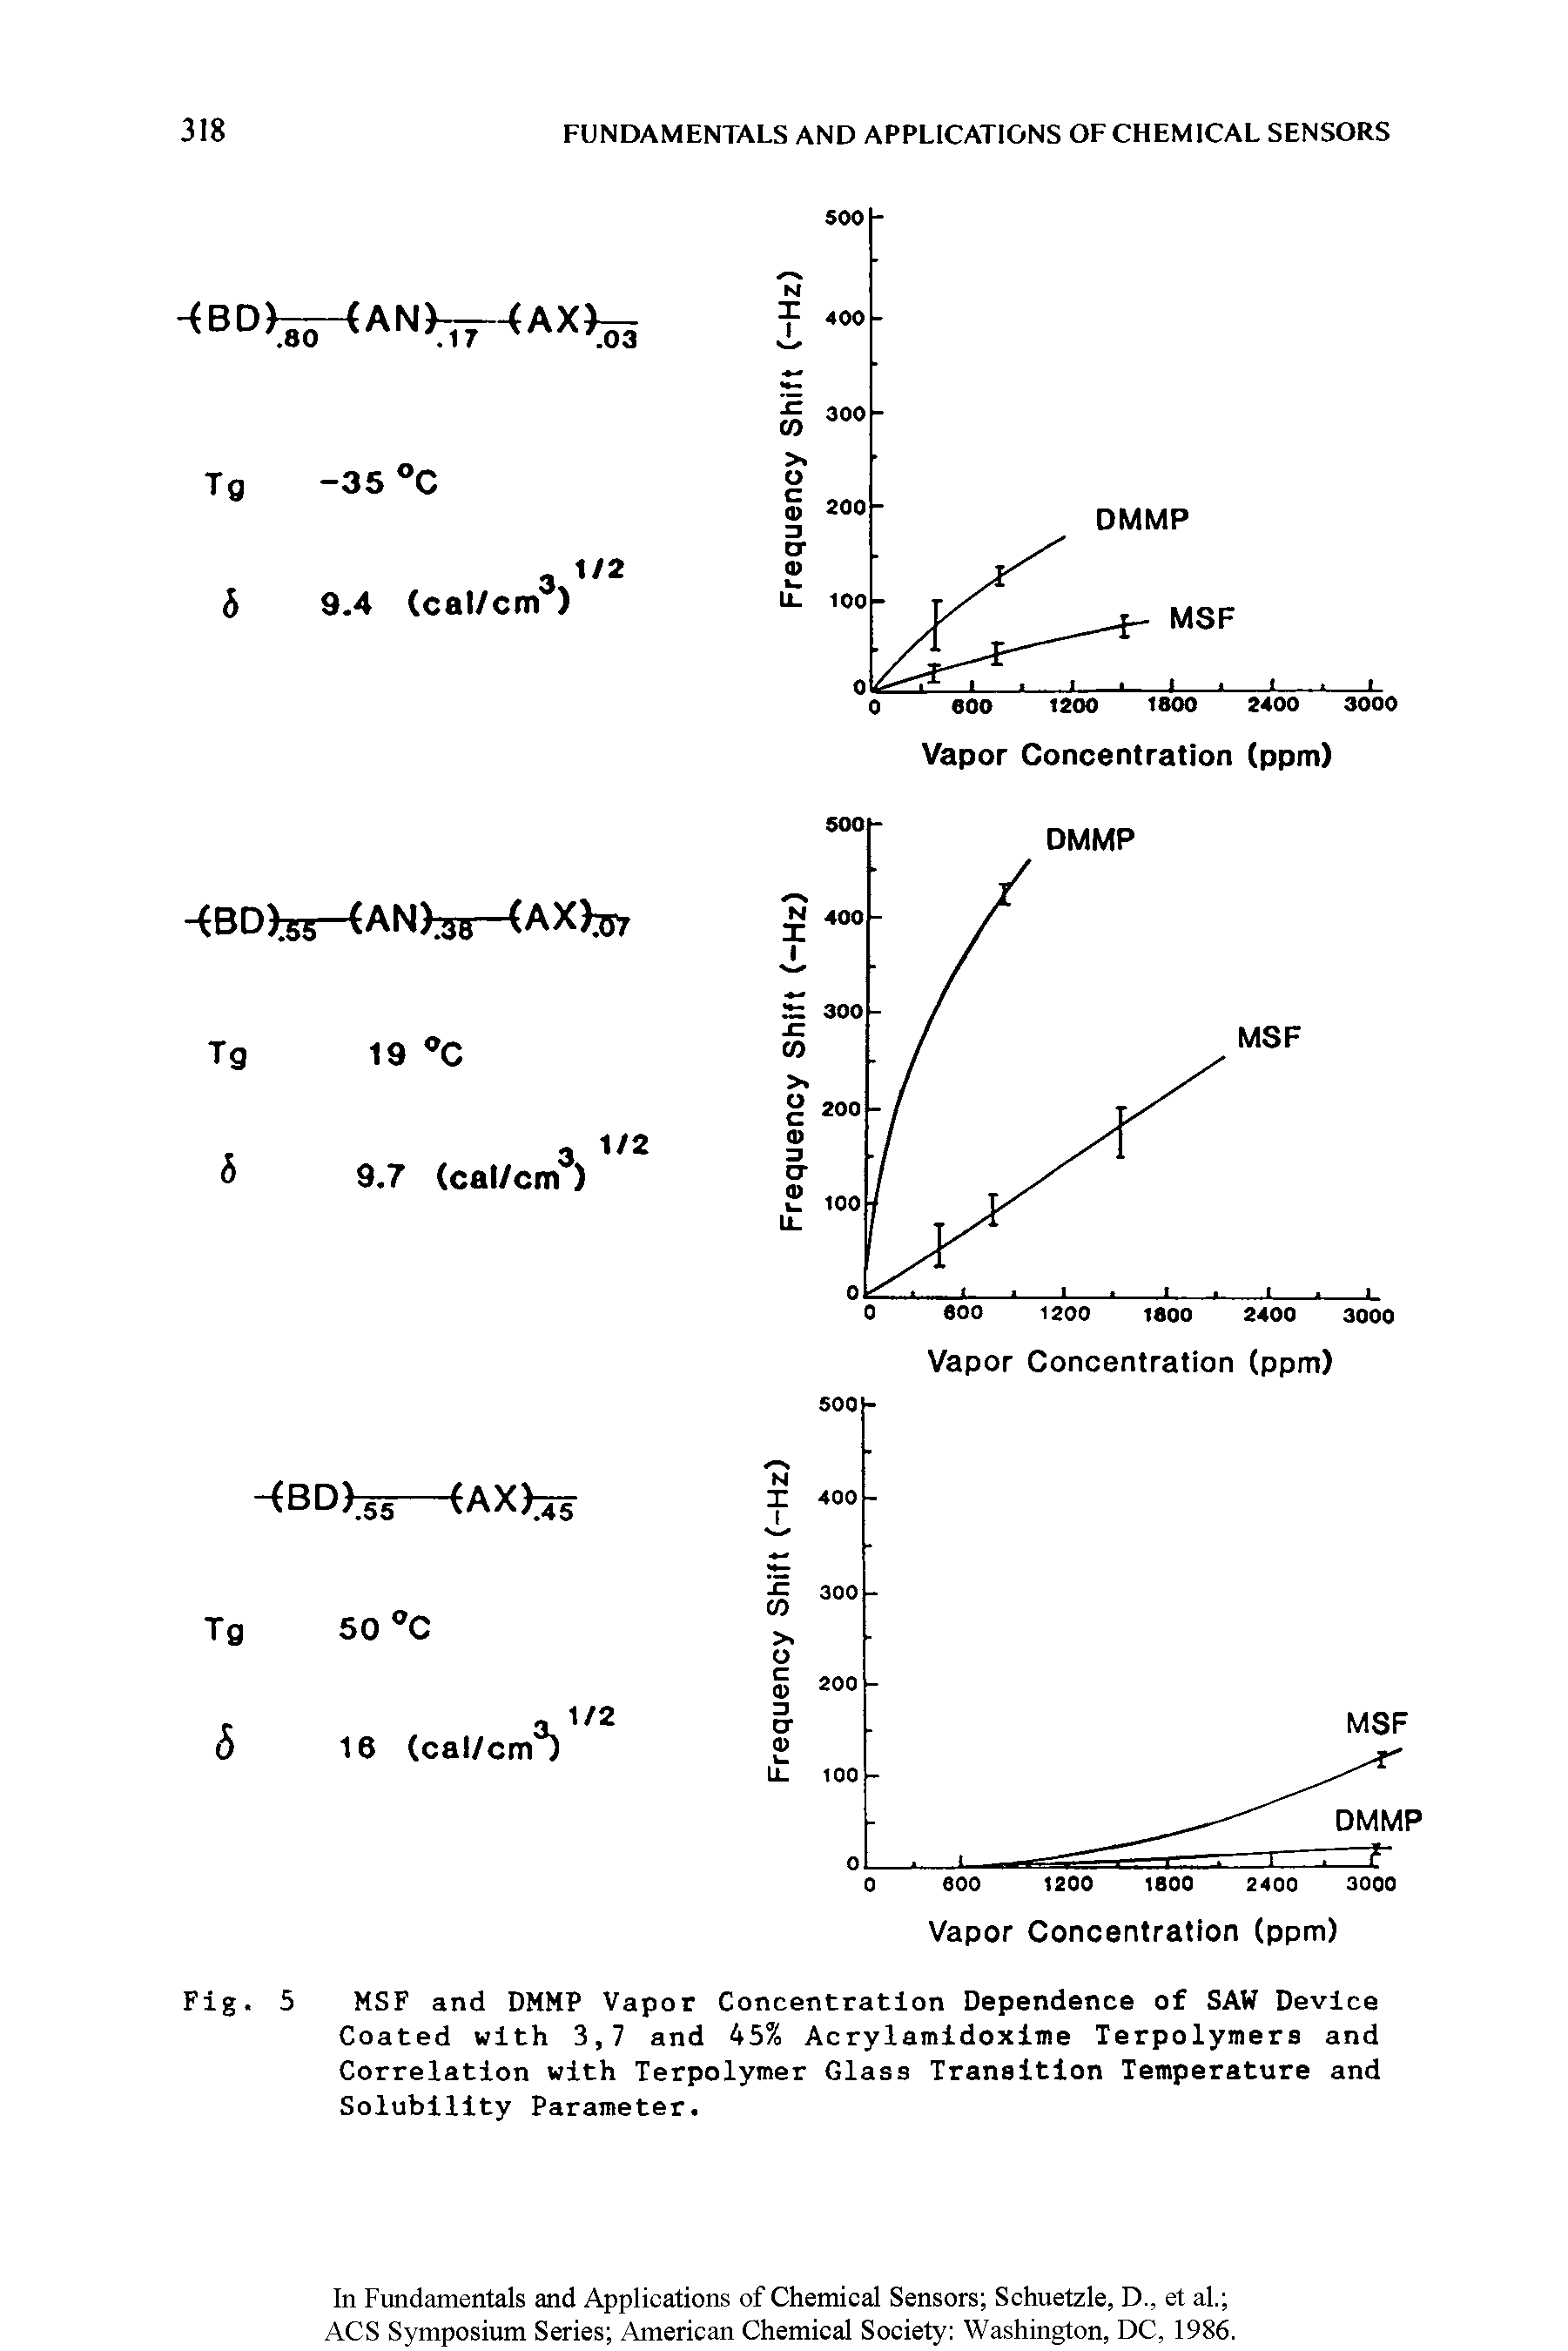 Fig. 5 MSF and DMMP Vapor Concentration Dependence of SAW Device Coated with 3,7 and 45% Acrylamidoxime Terpolymers and Correlation with Terpolymer Glass Transition Temperature and Solubility Parameter.